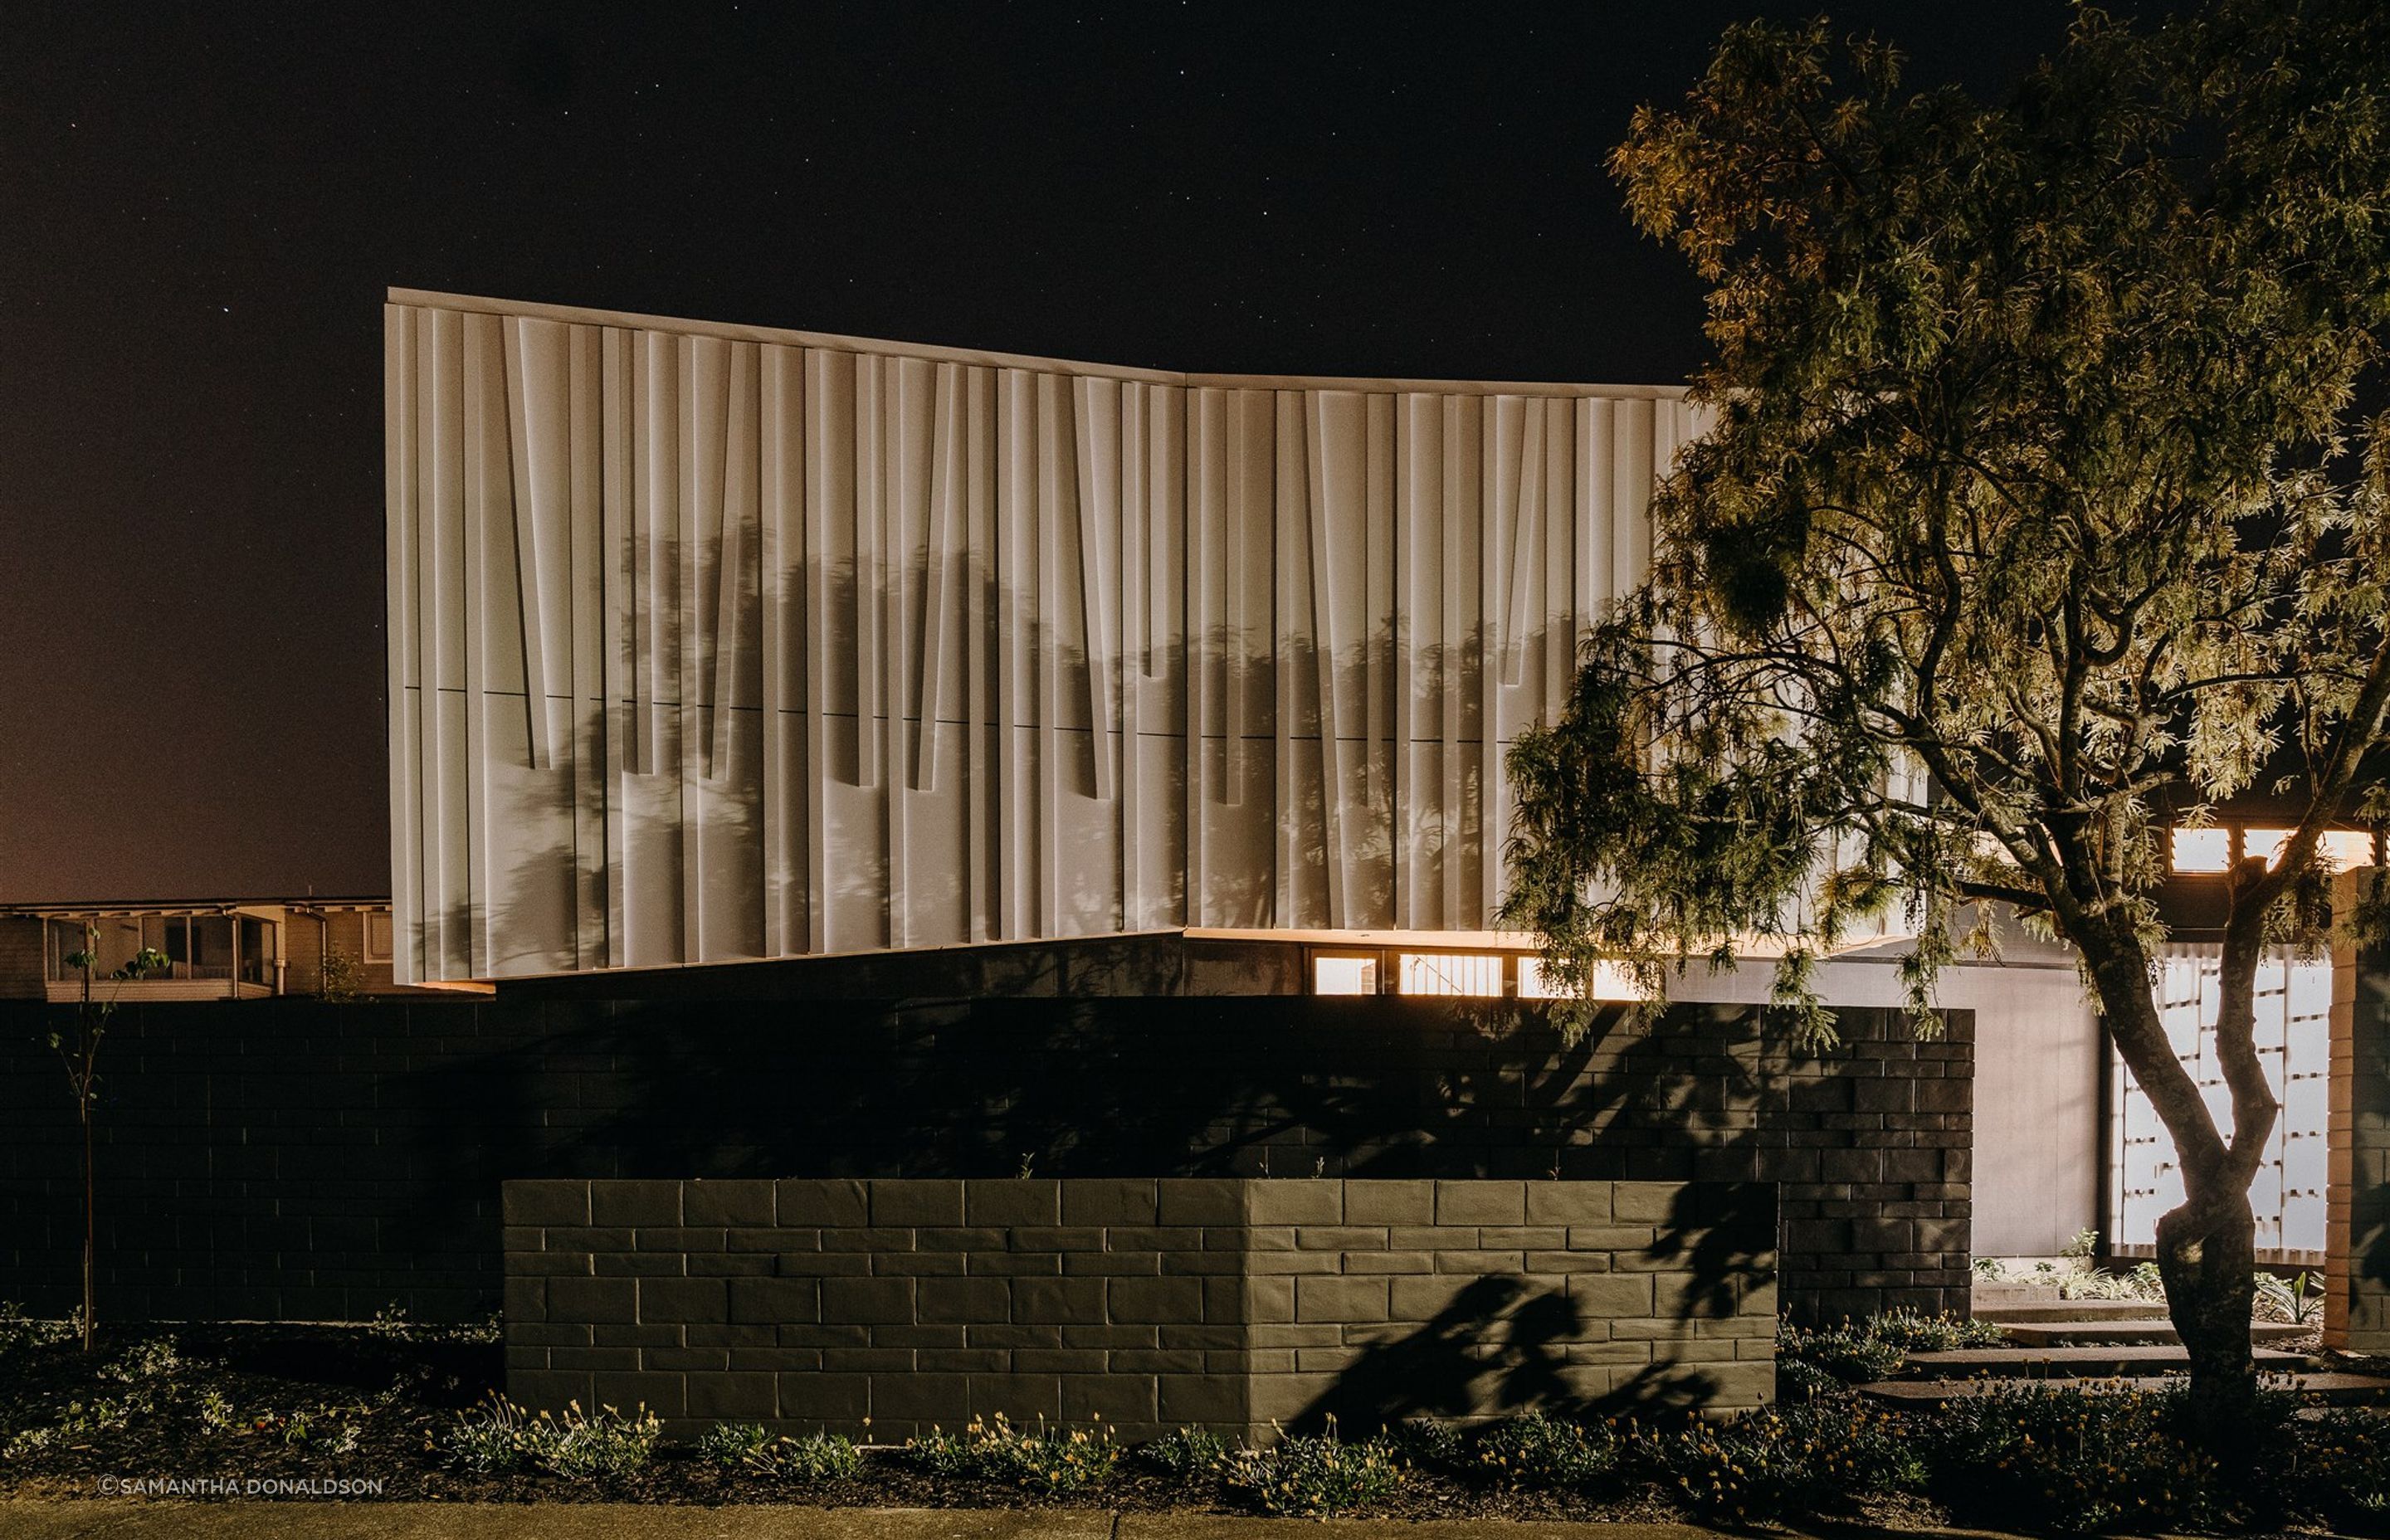 The 'shroud' or top level of the house is illuminated at night, with shadows cast from the surrounding trees to highlight the unique textural form. 